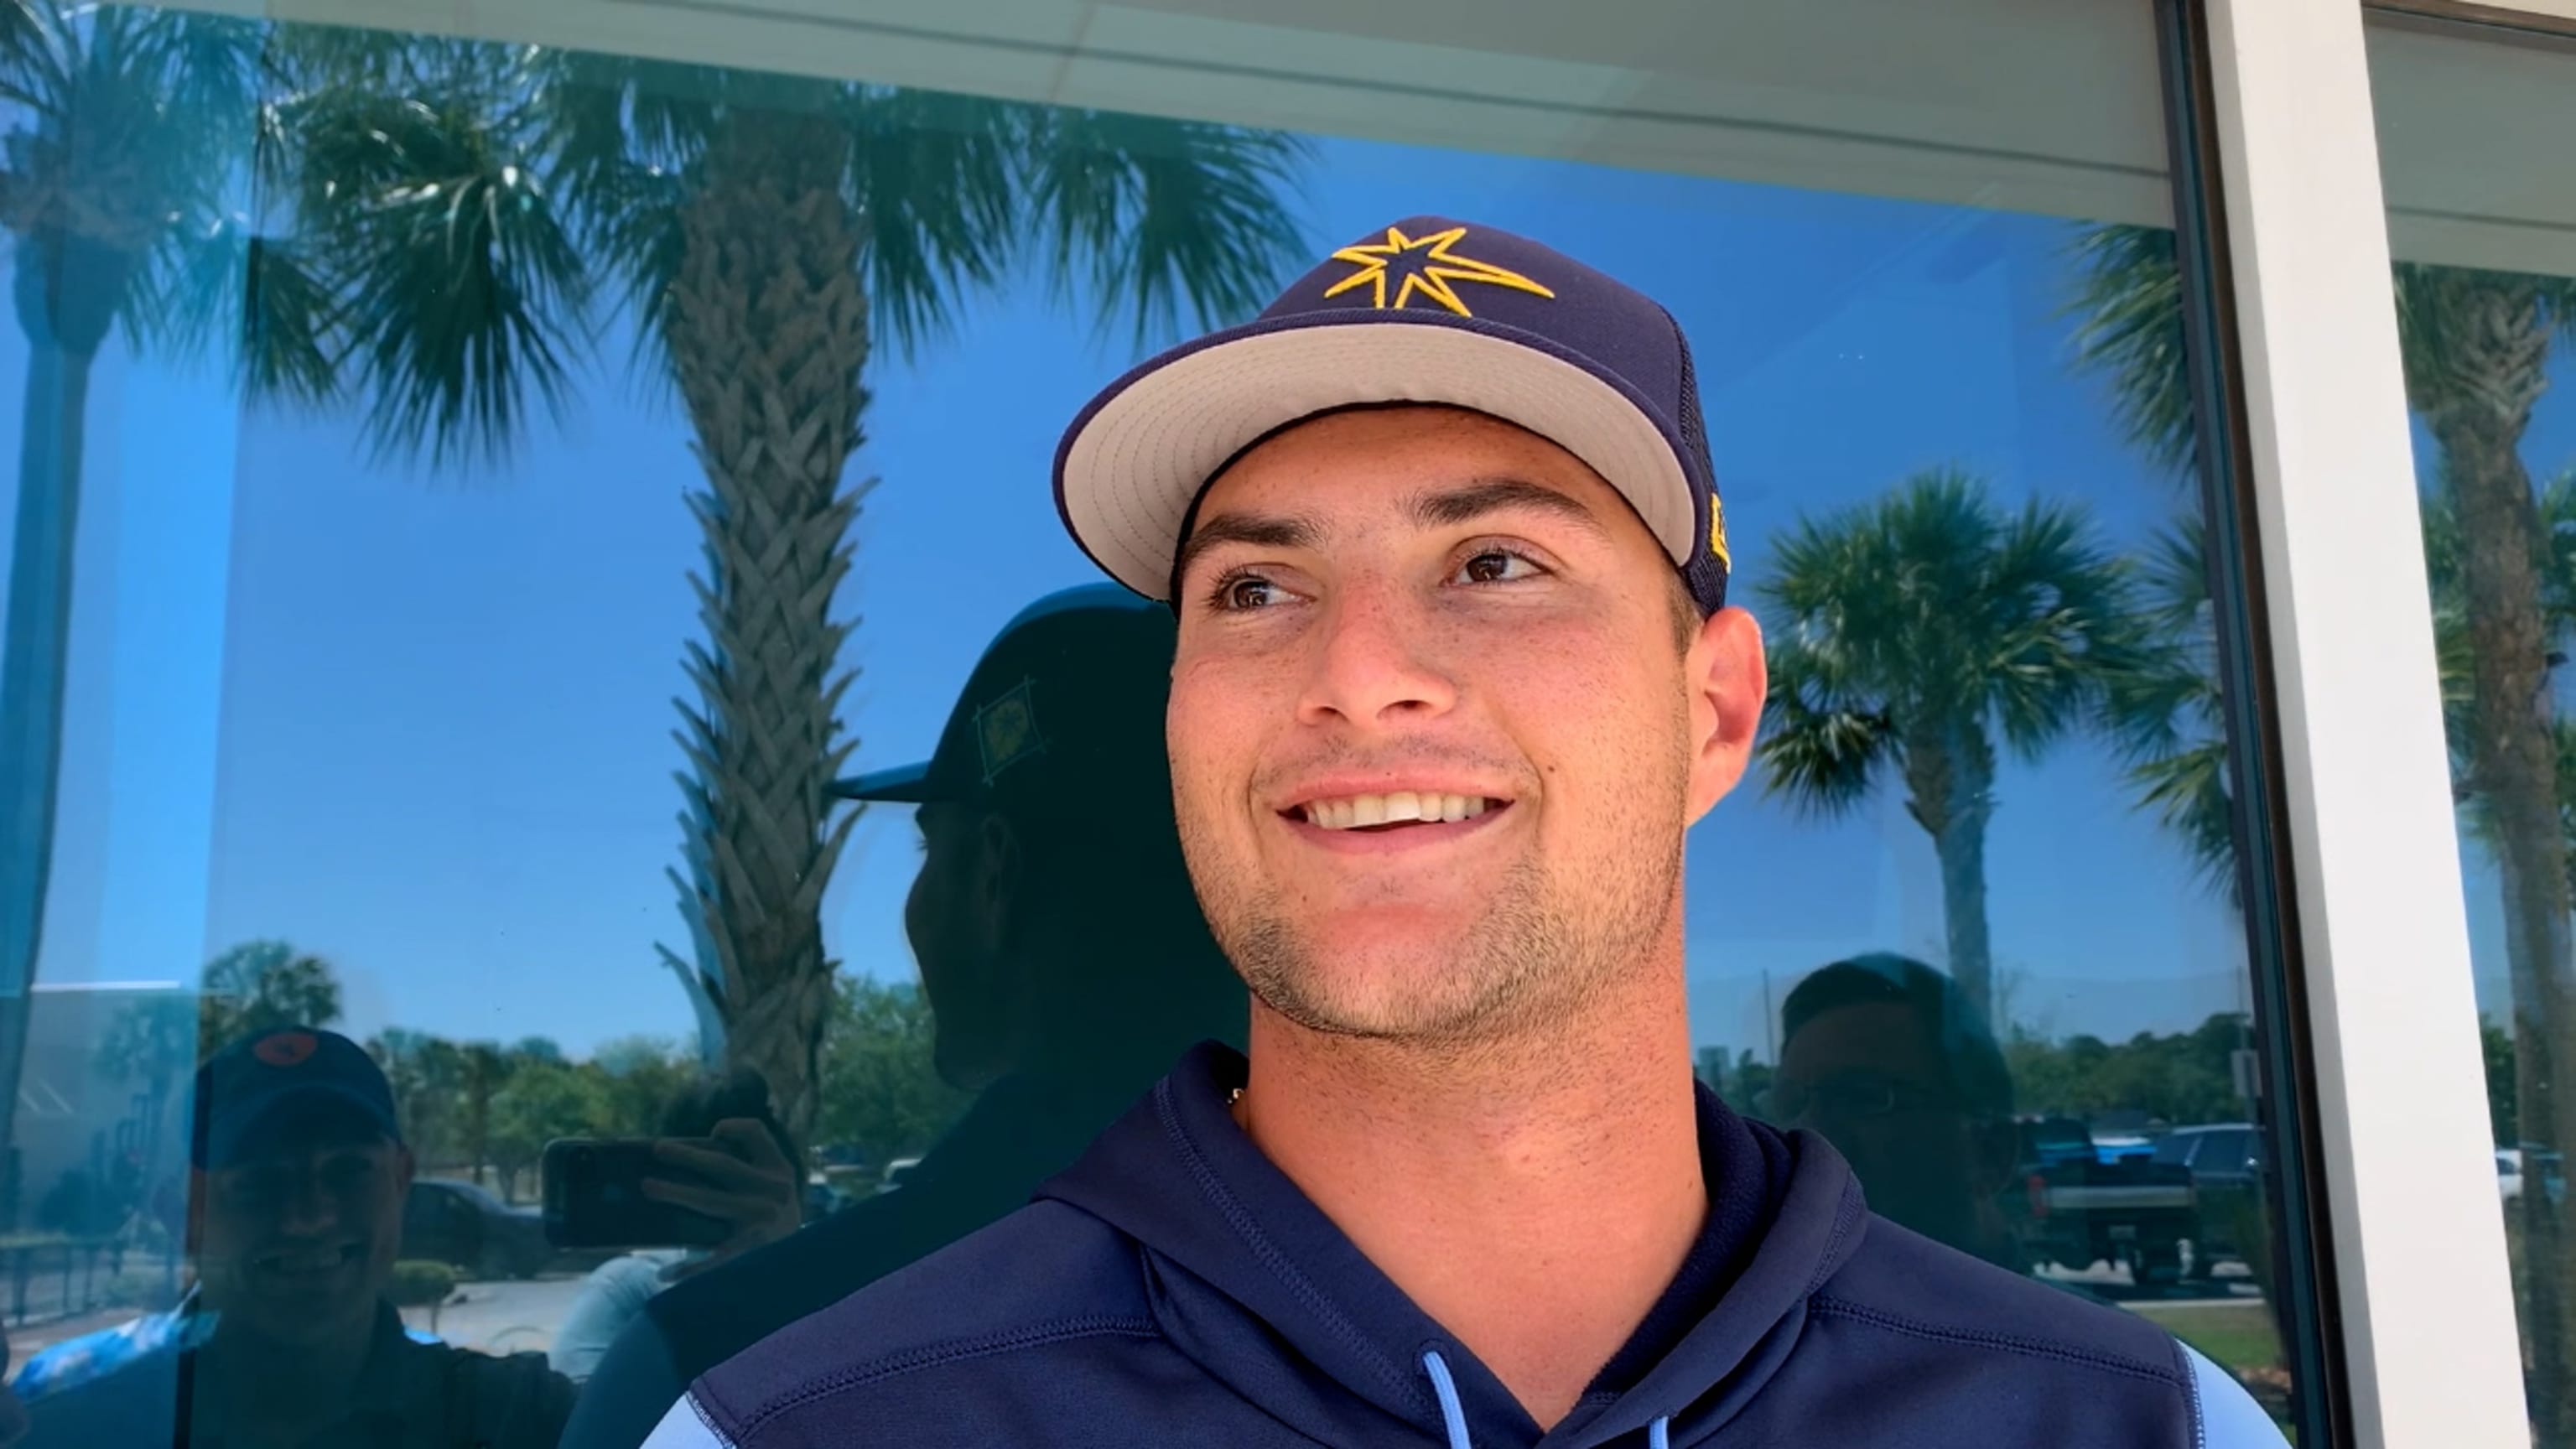 McClanahan on Opening Day nod